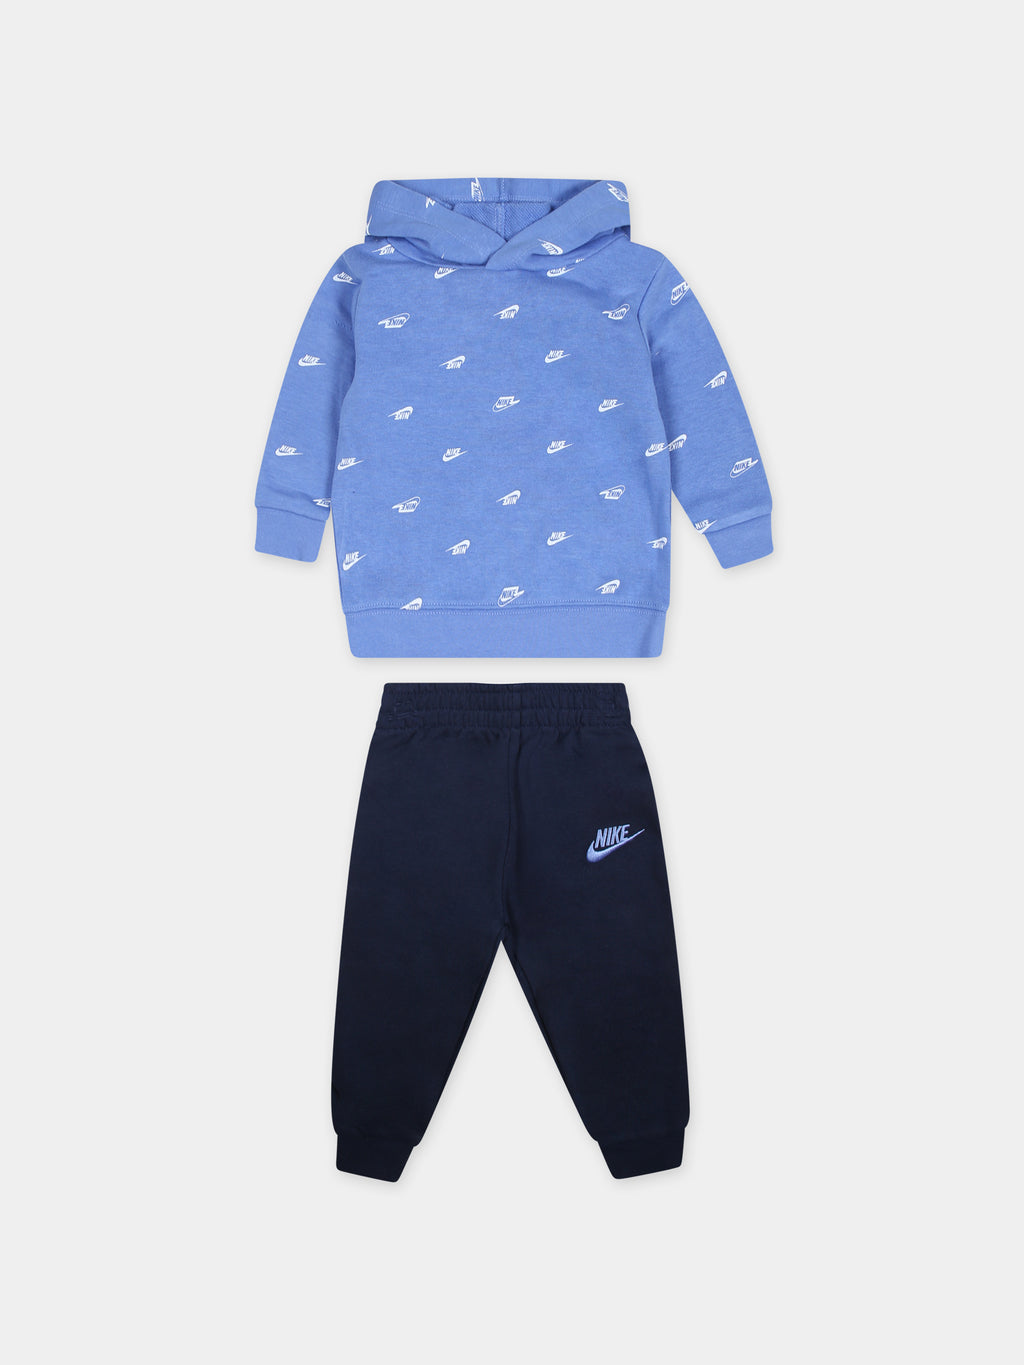 Blue suit for baby boy with logo